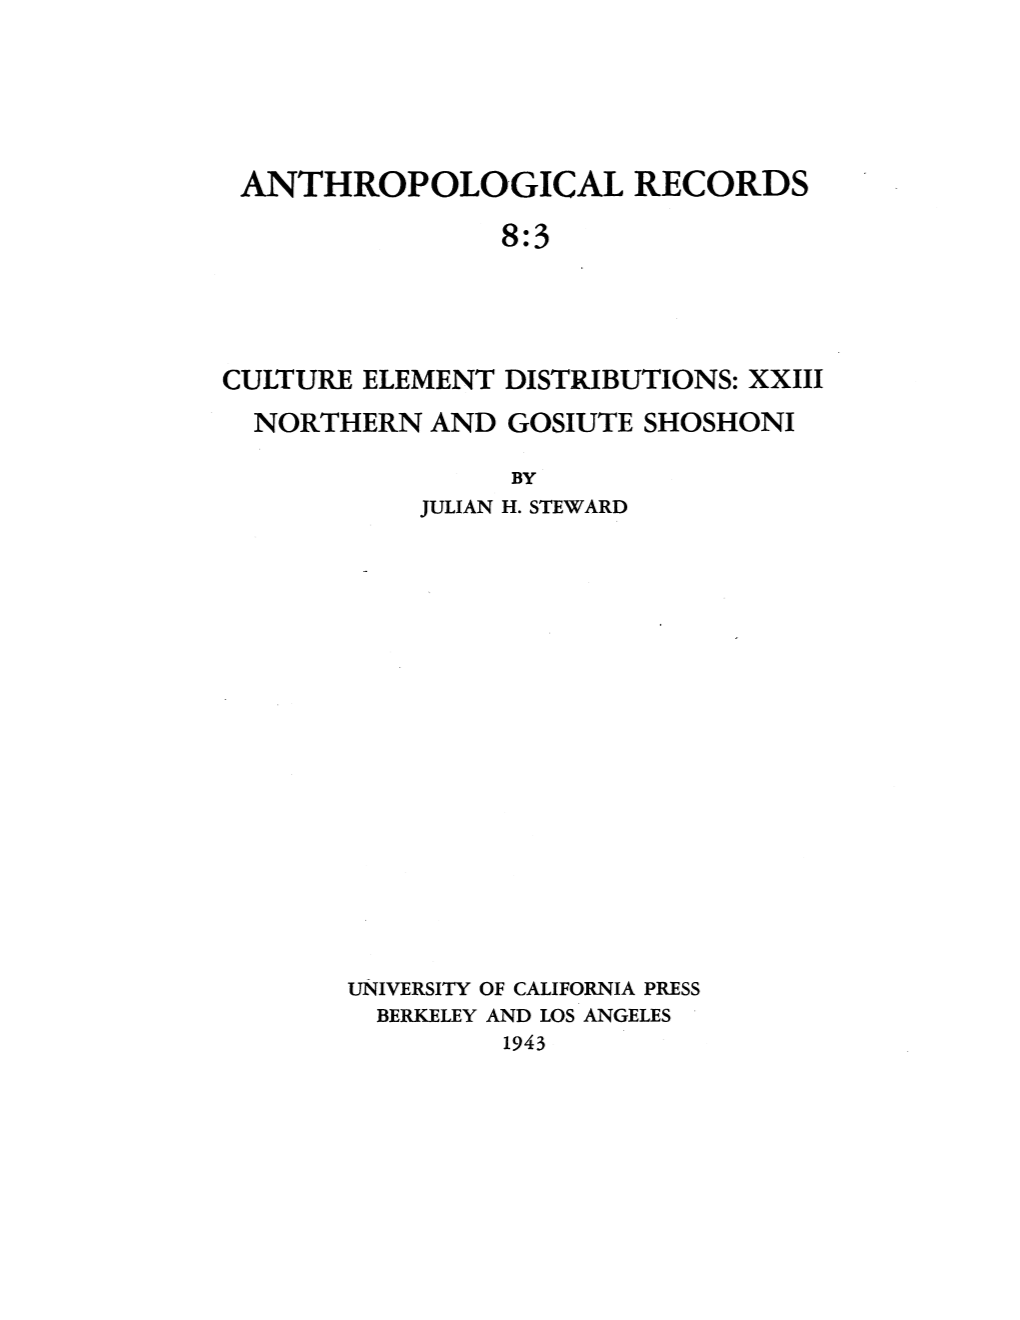 Anthropological Records 8:3